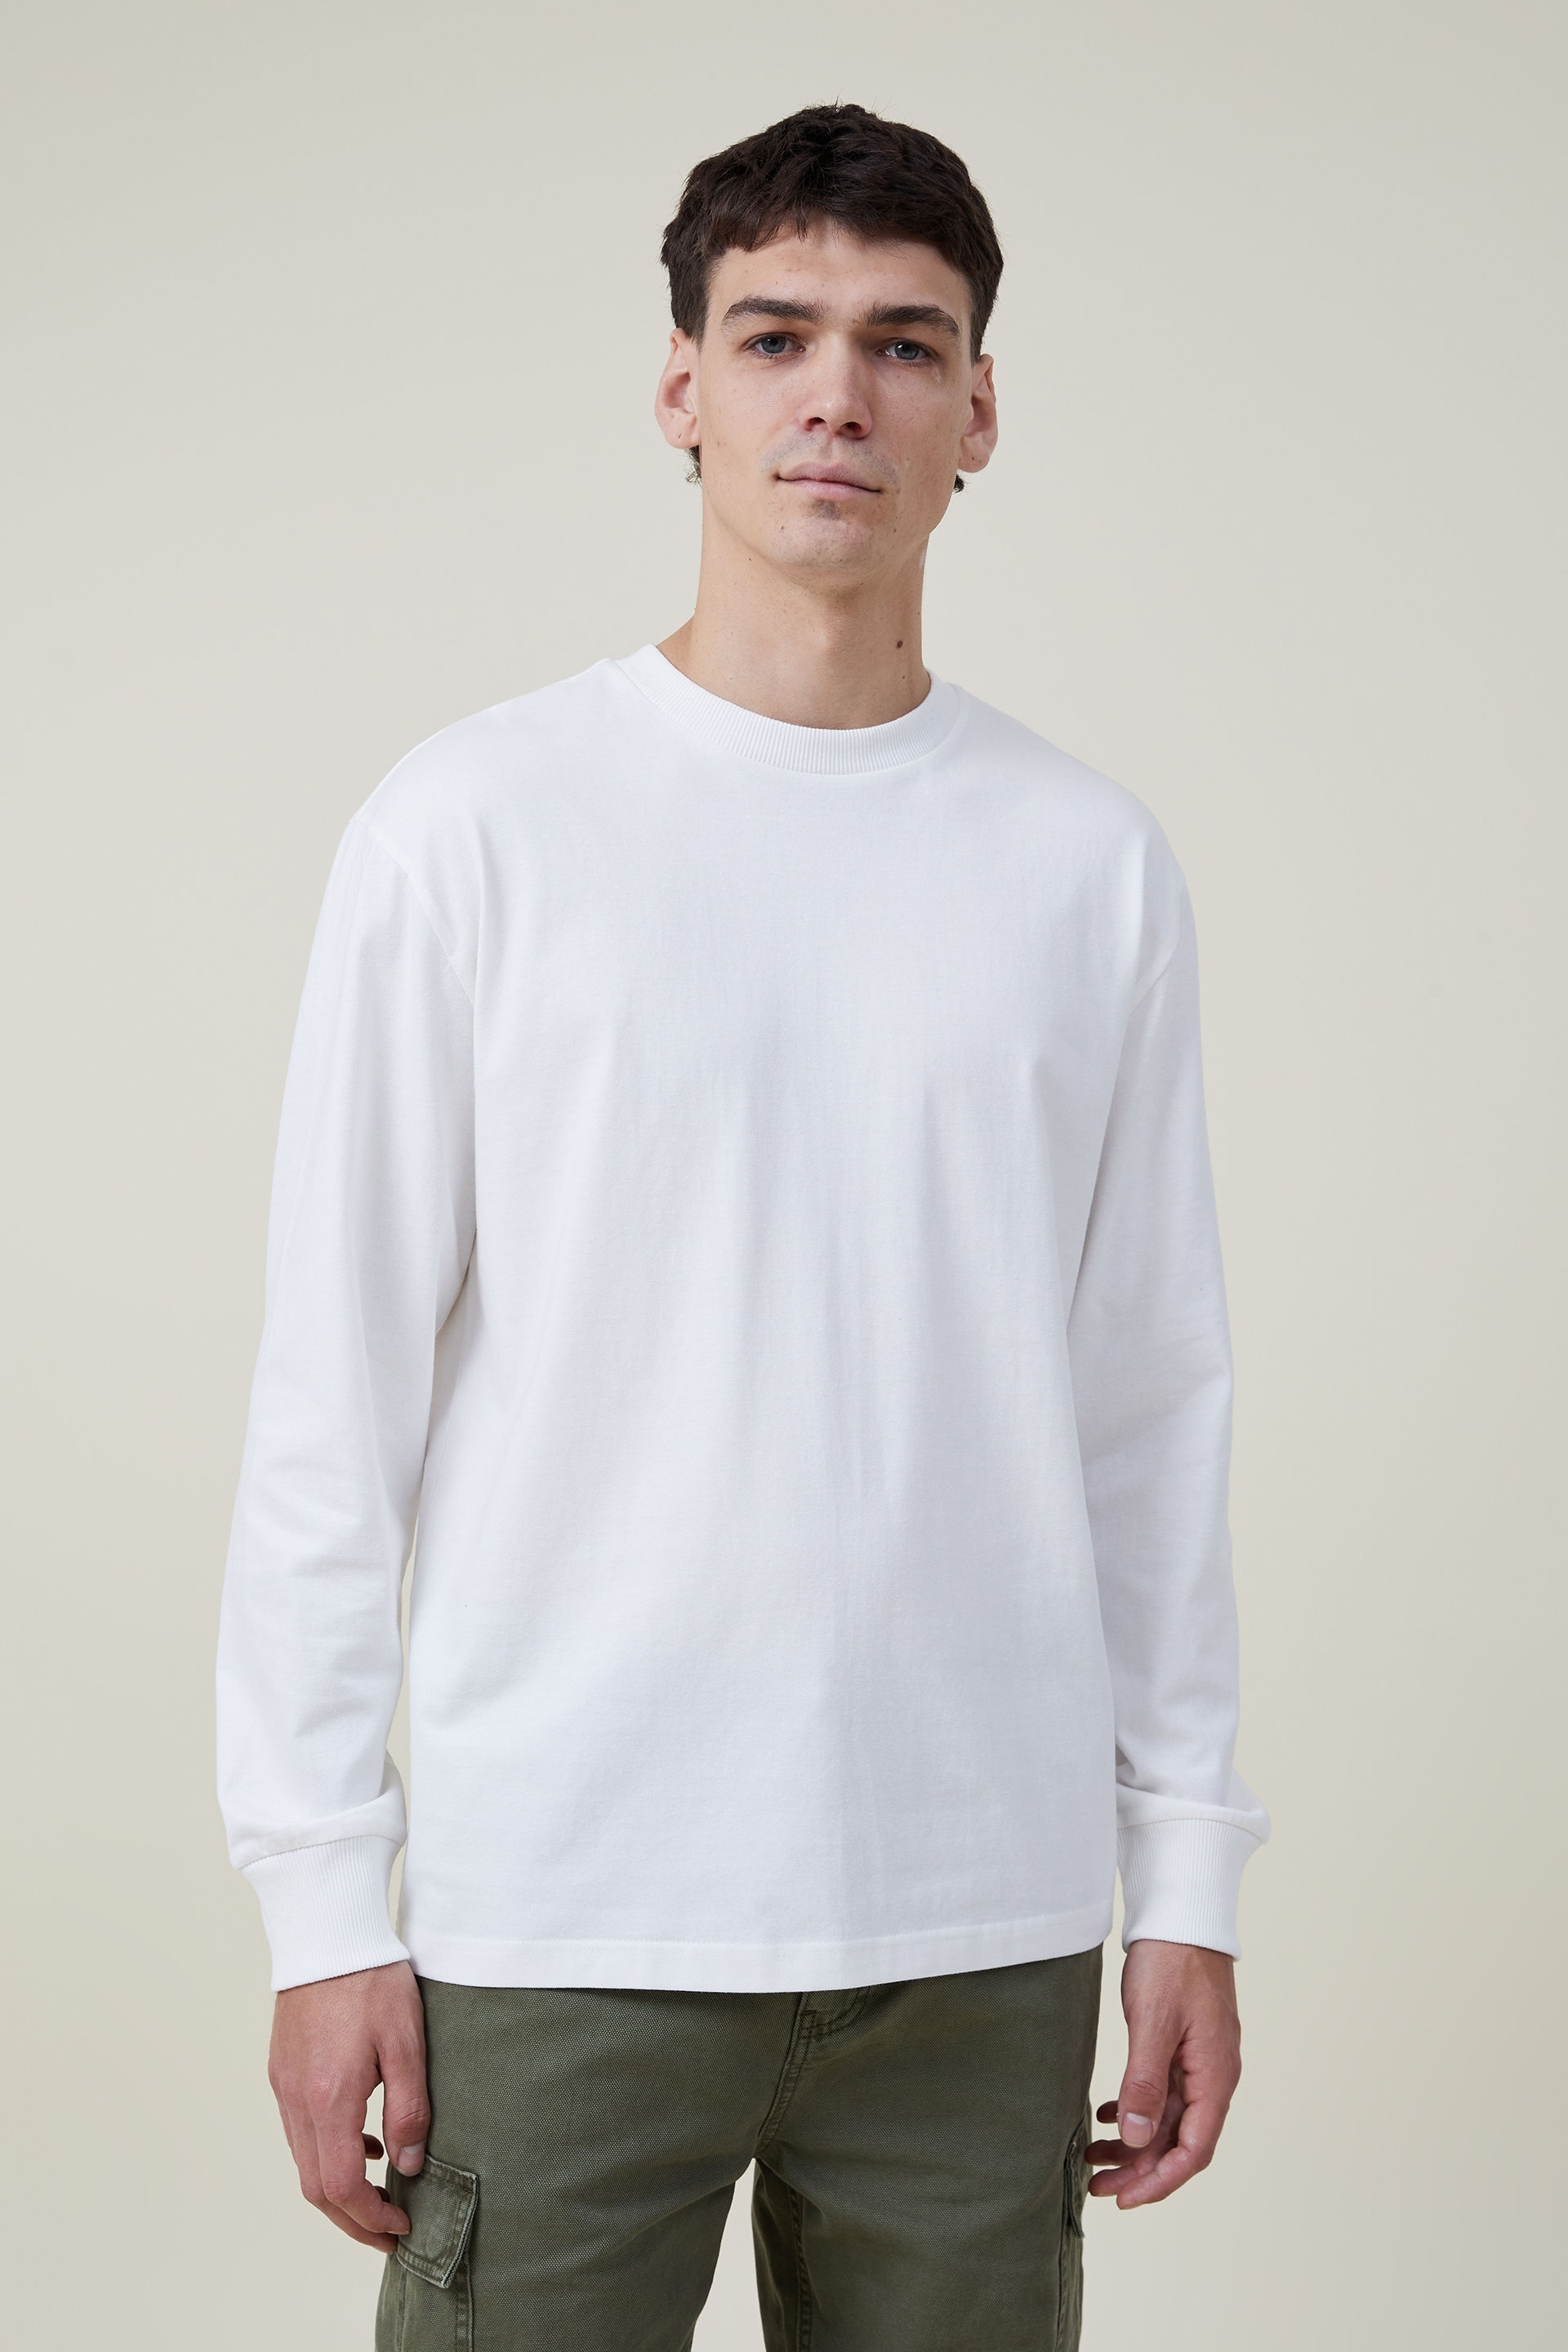 Cotton On Men - Loose Fit Long Sleeve Tshirt - Vintage white